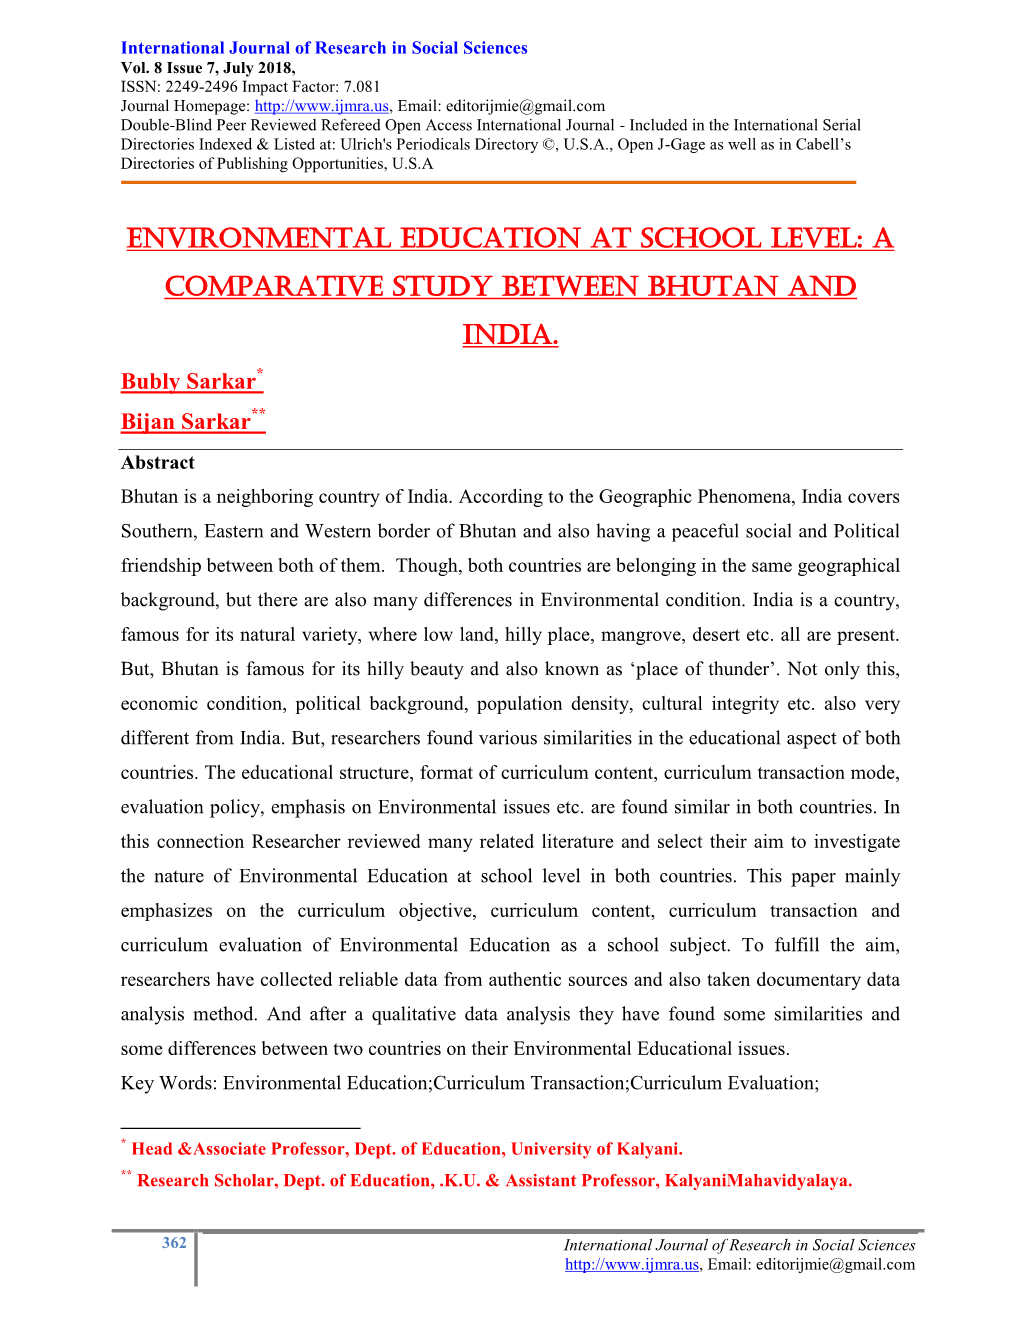 Environmental Education at School Level: a Comparative Study Between Bhutan and India